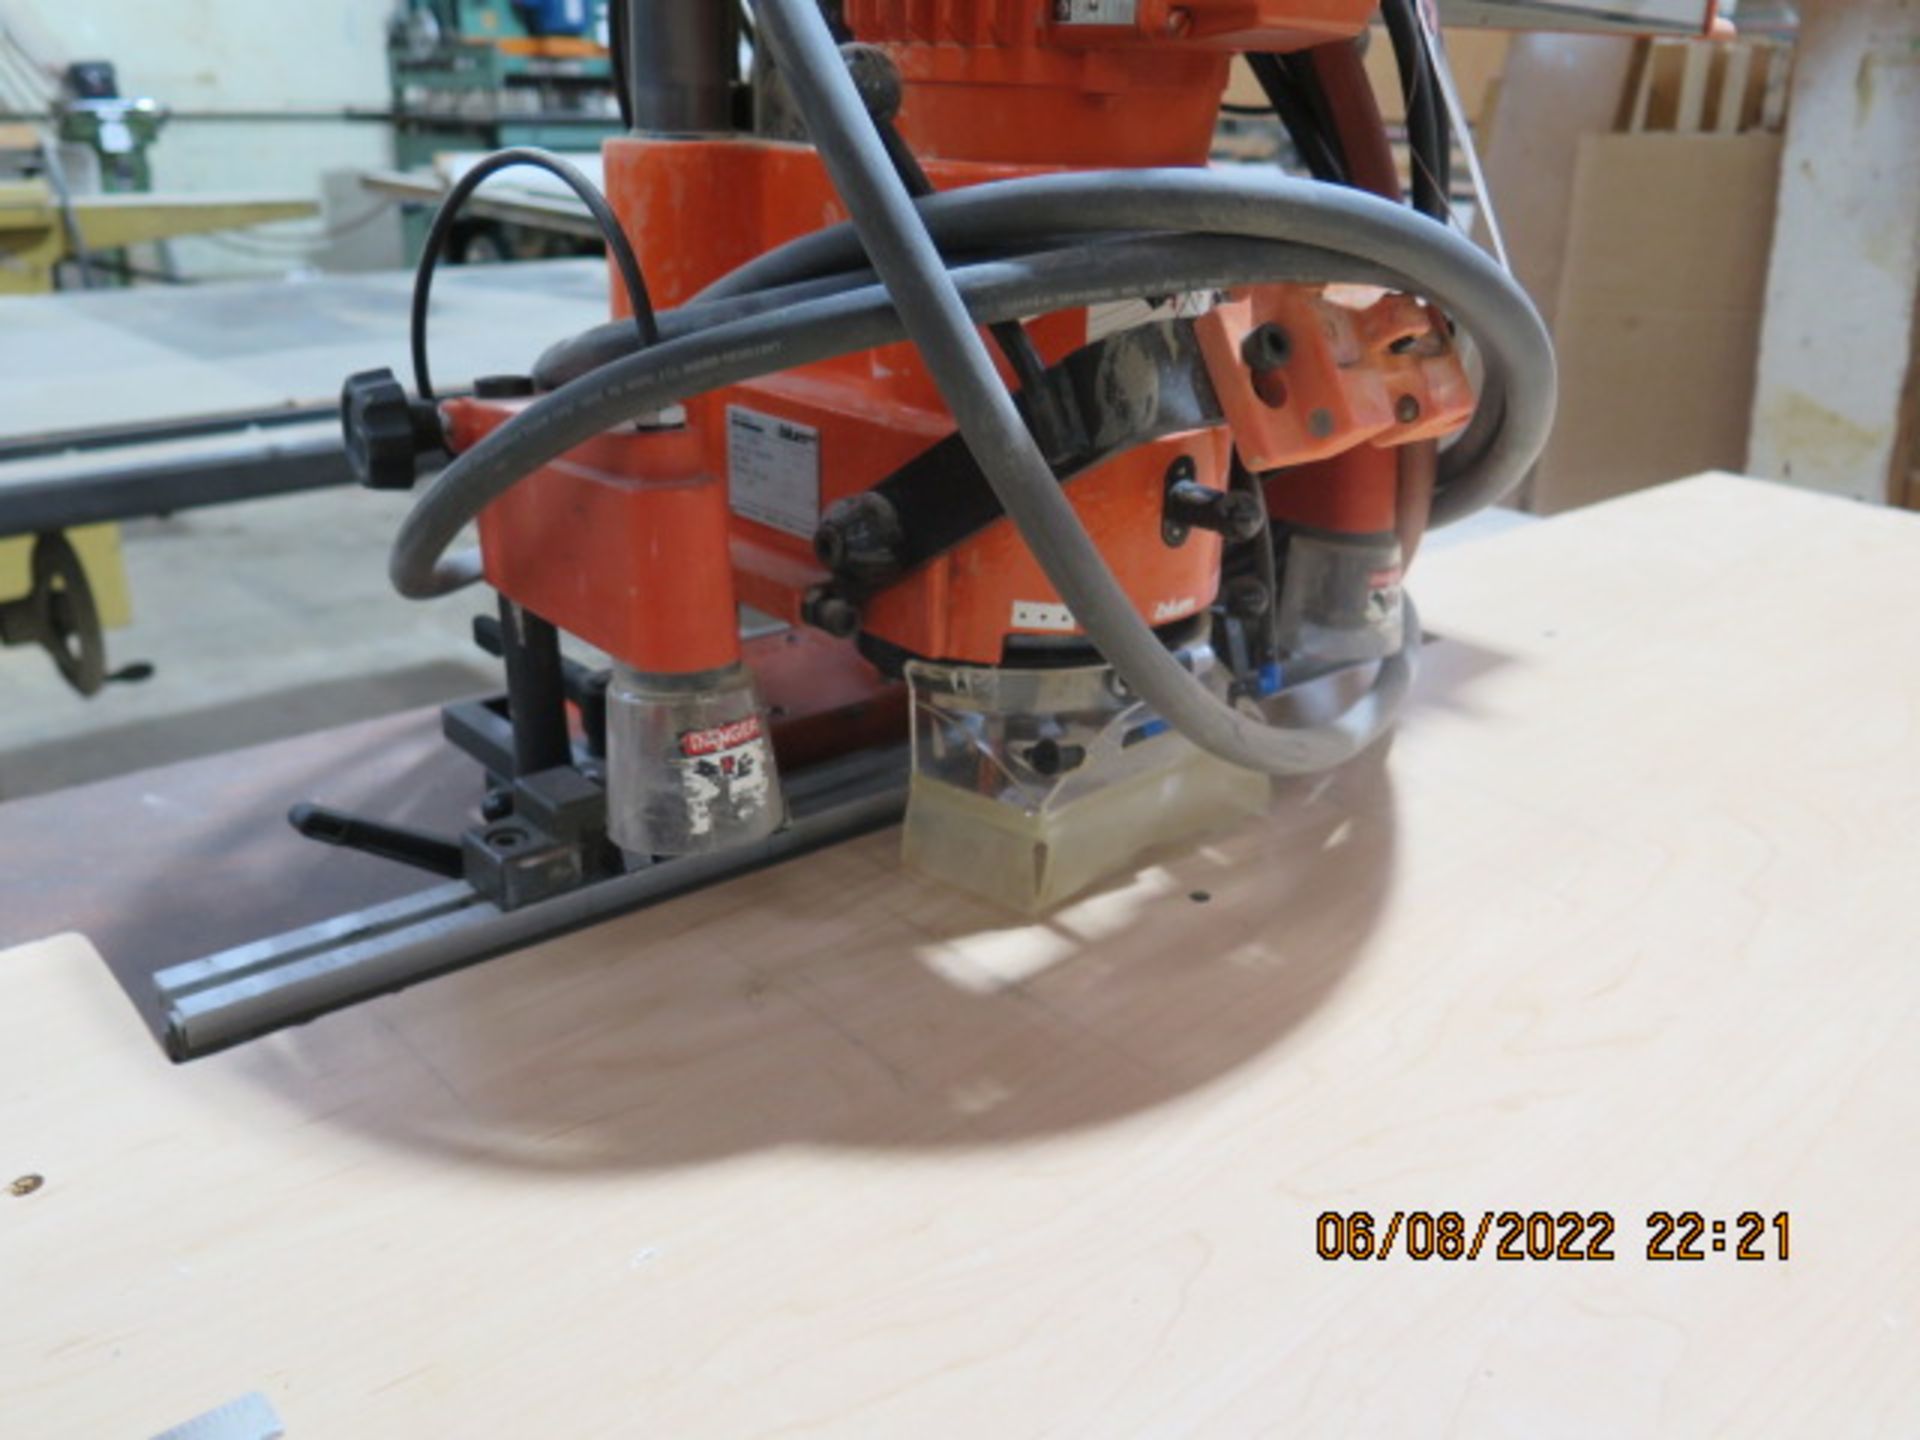 Blum mdl. M51N1004 “Mini Press” Hinge Router w/ Table (SOLD AS-IS - NO WARRANTY) - Image 3 of 6